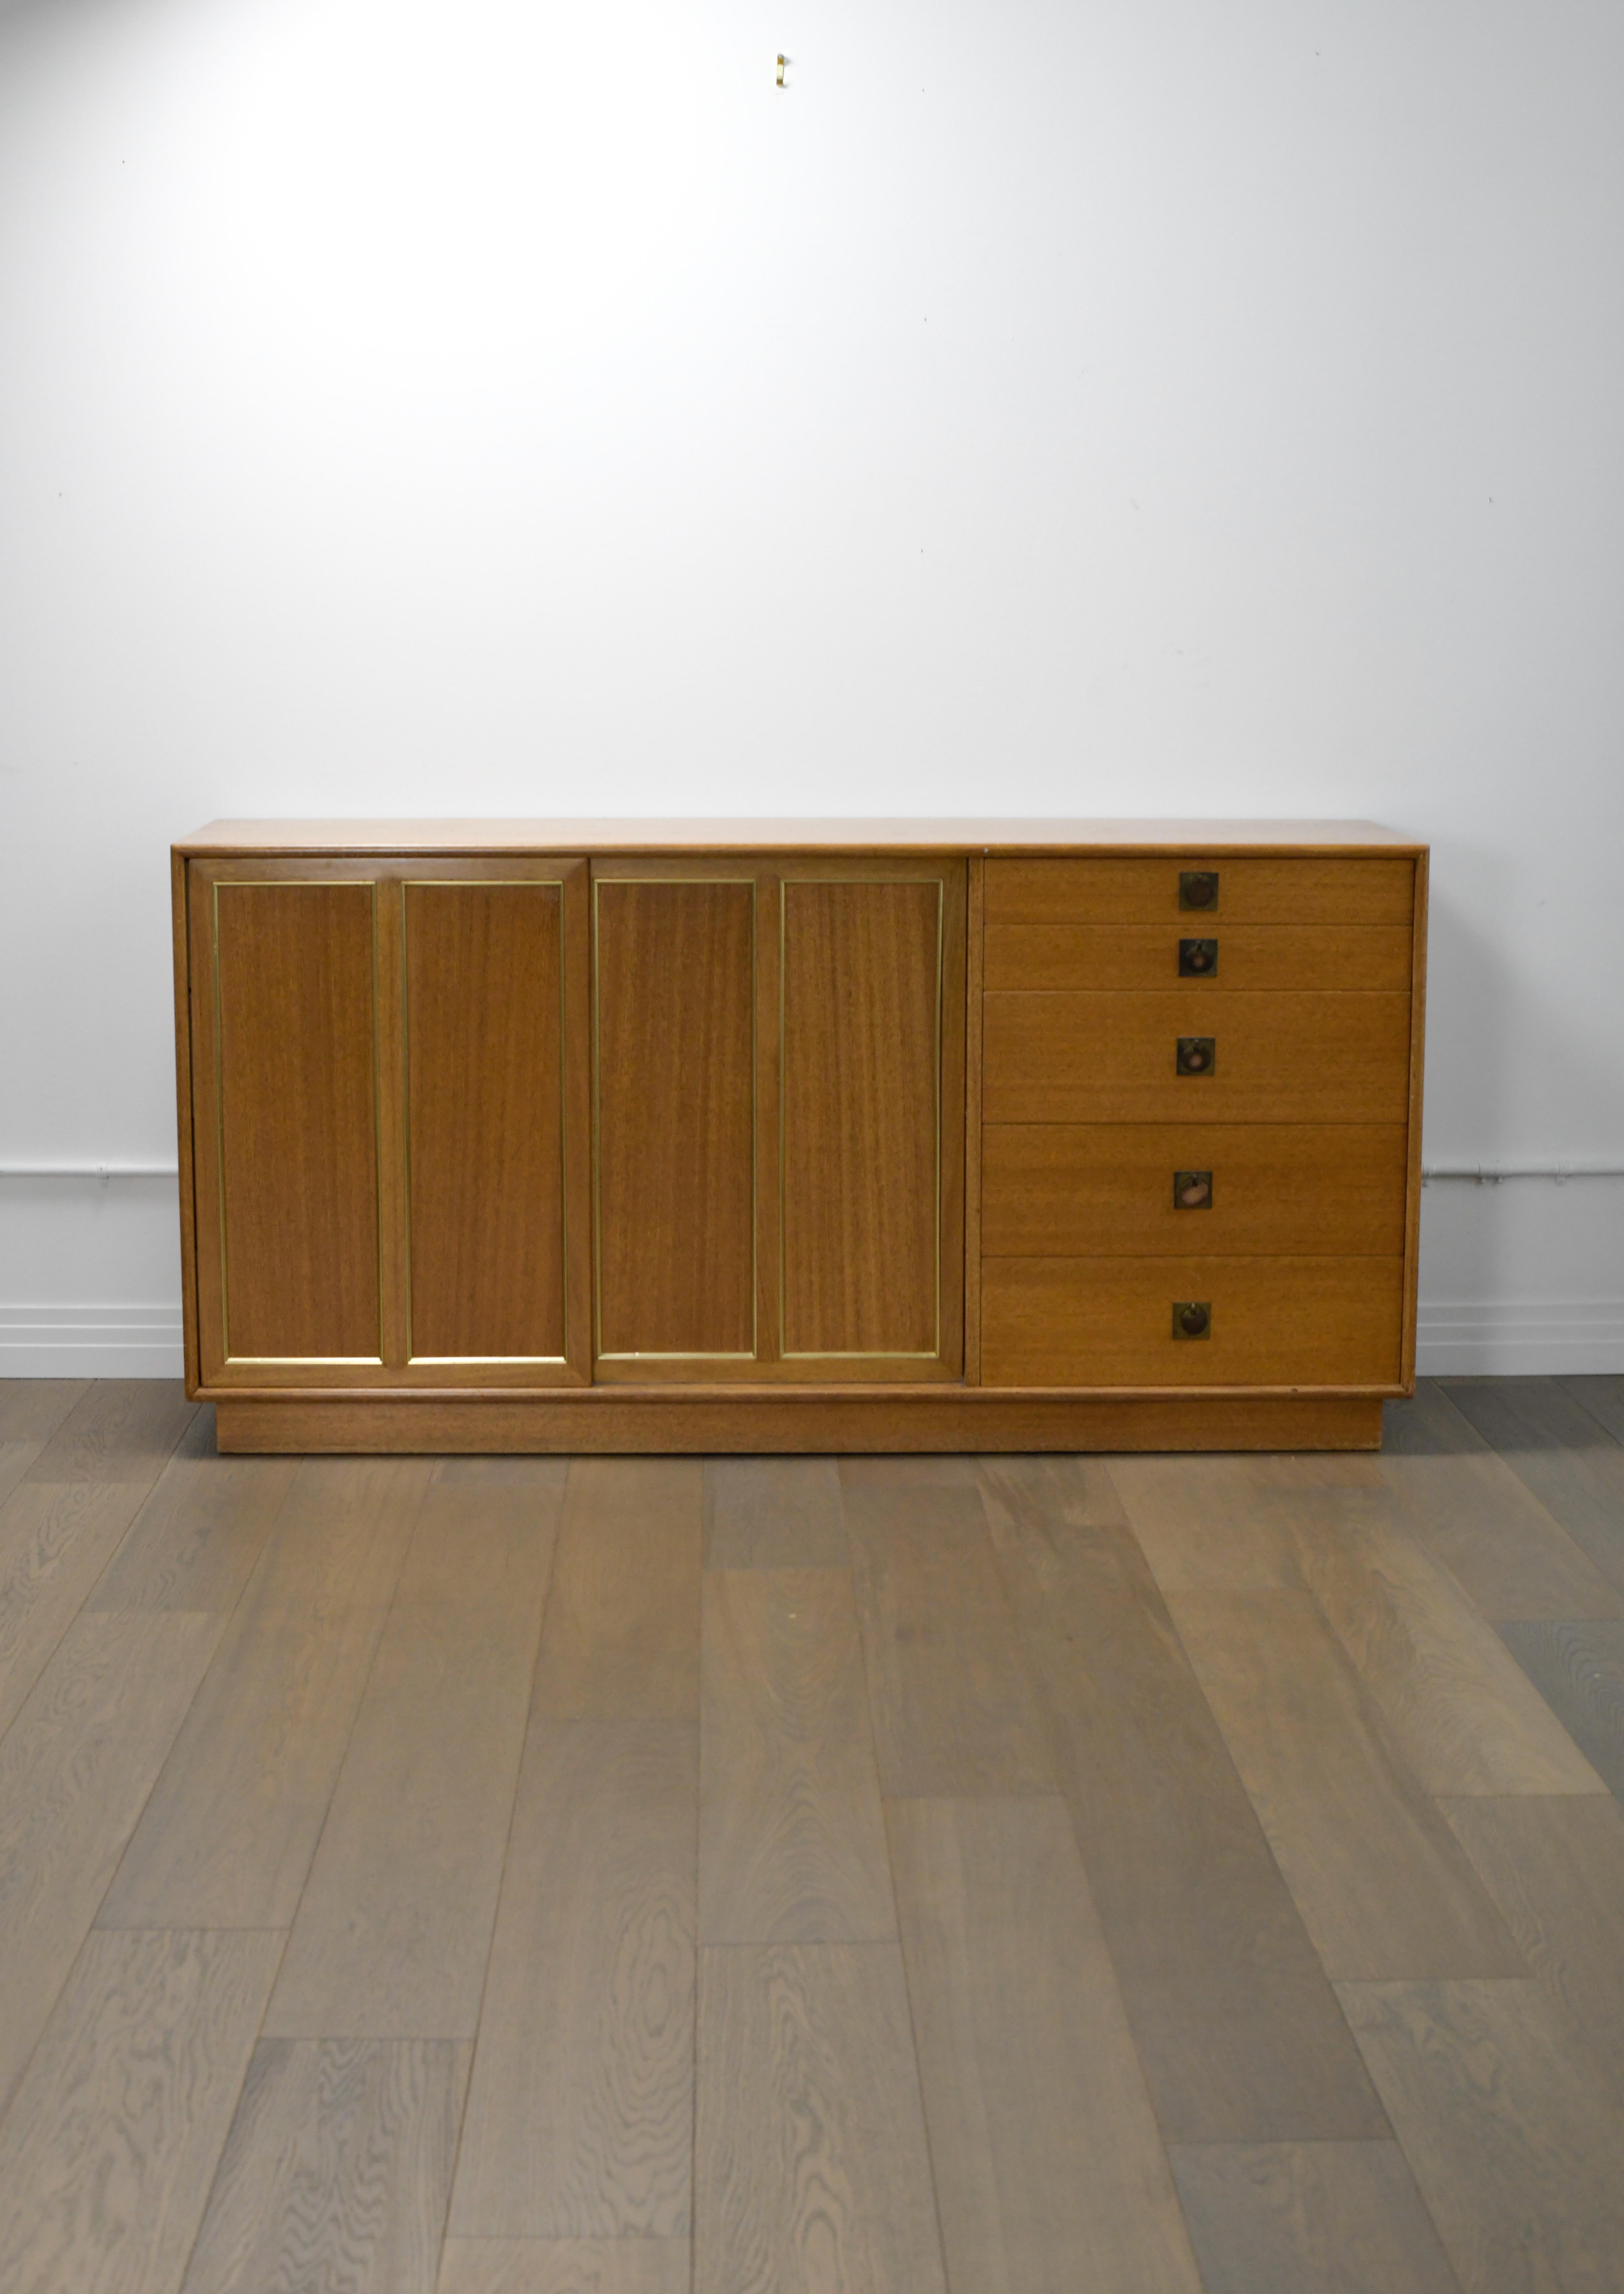 Bleached Mahogany Credenza by Harvey Probber. 

This credenza is in good vintage condition and has a patina commensurate with its age. Four white accent drawers can be revealed by sliding the left door to the middle, giving this piece the ability to